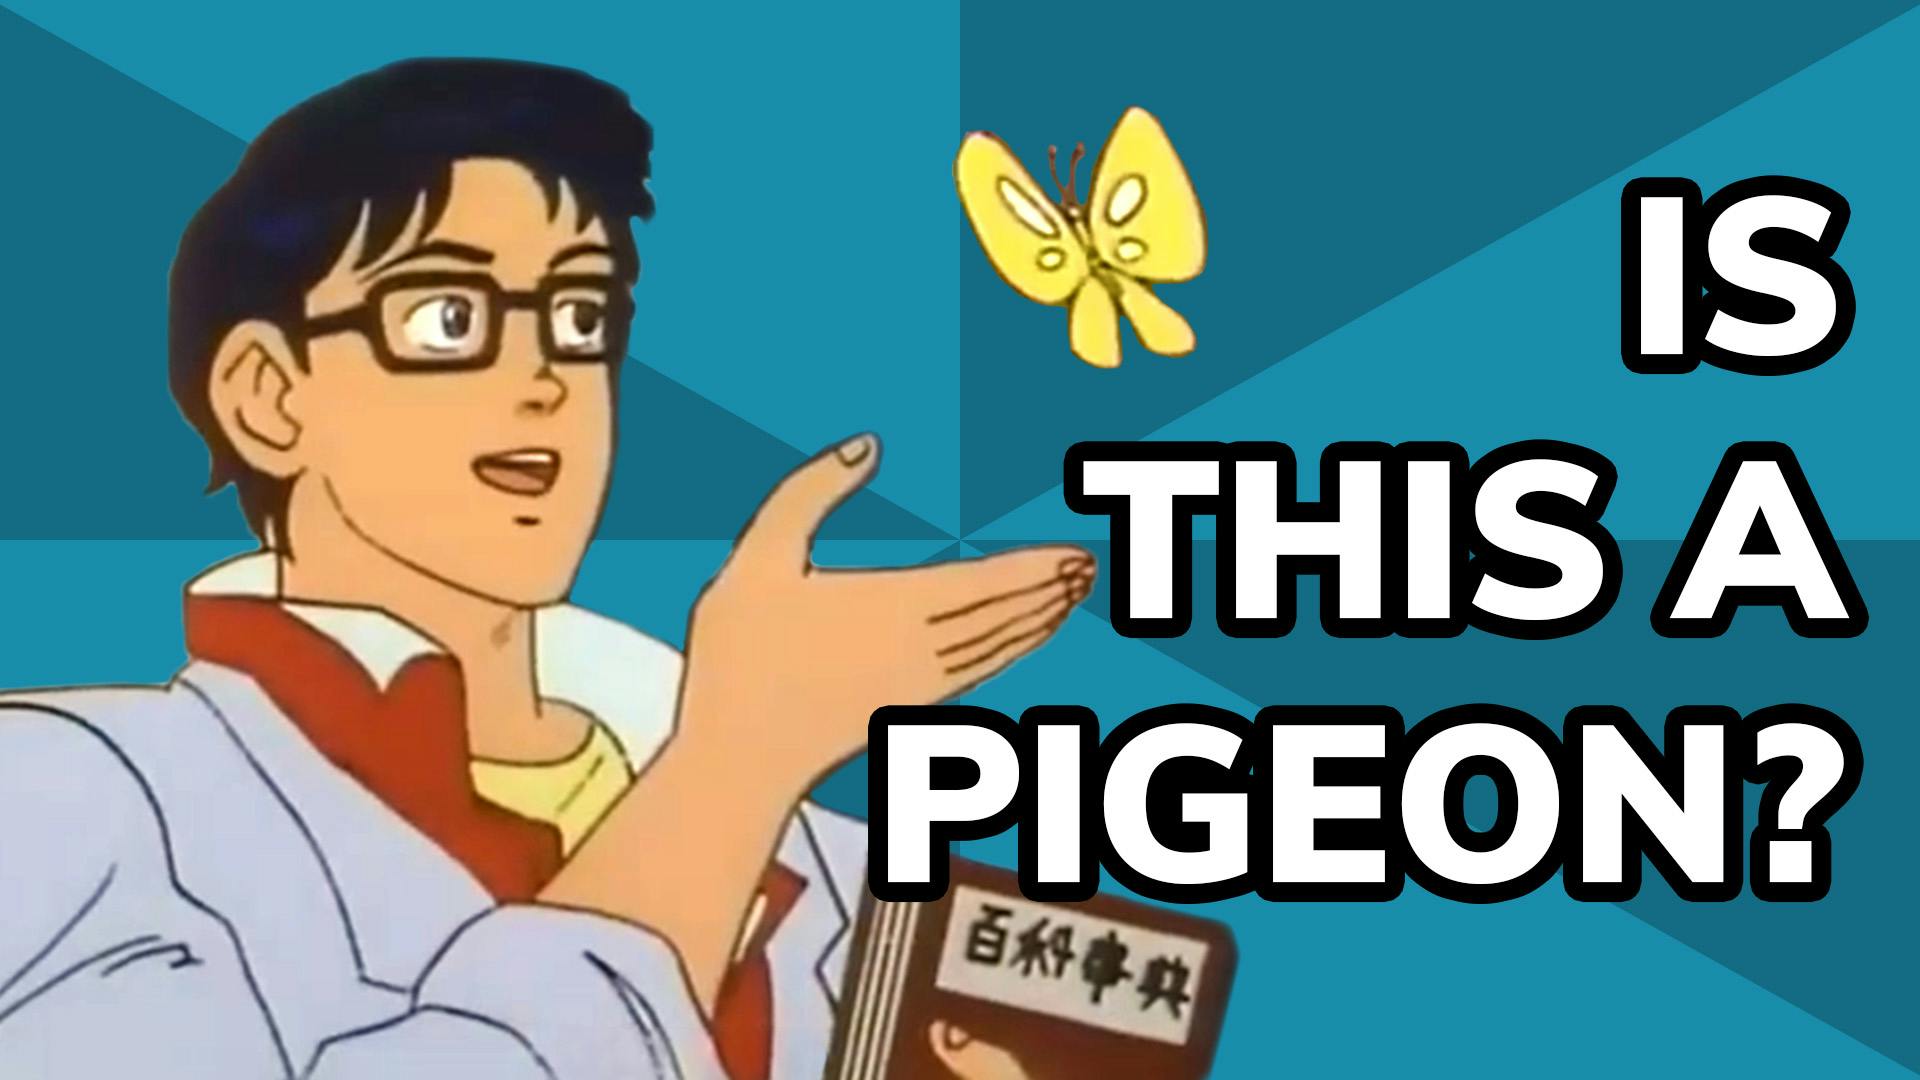 Is This A Pigeon?